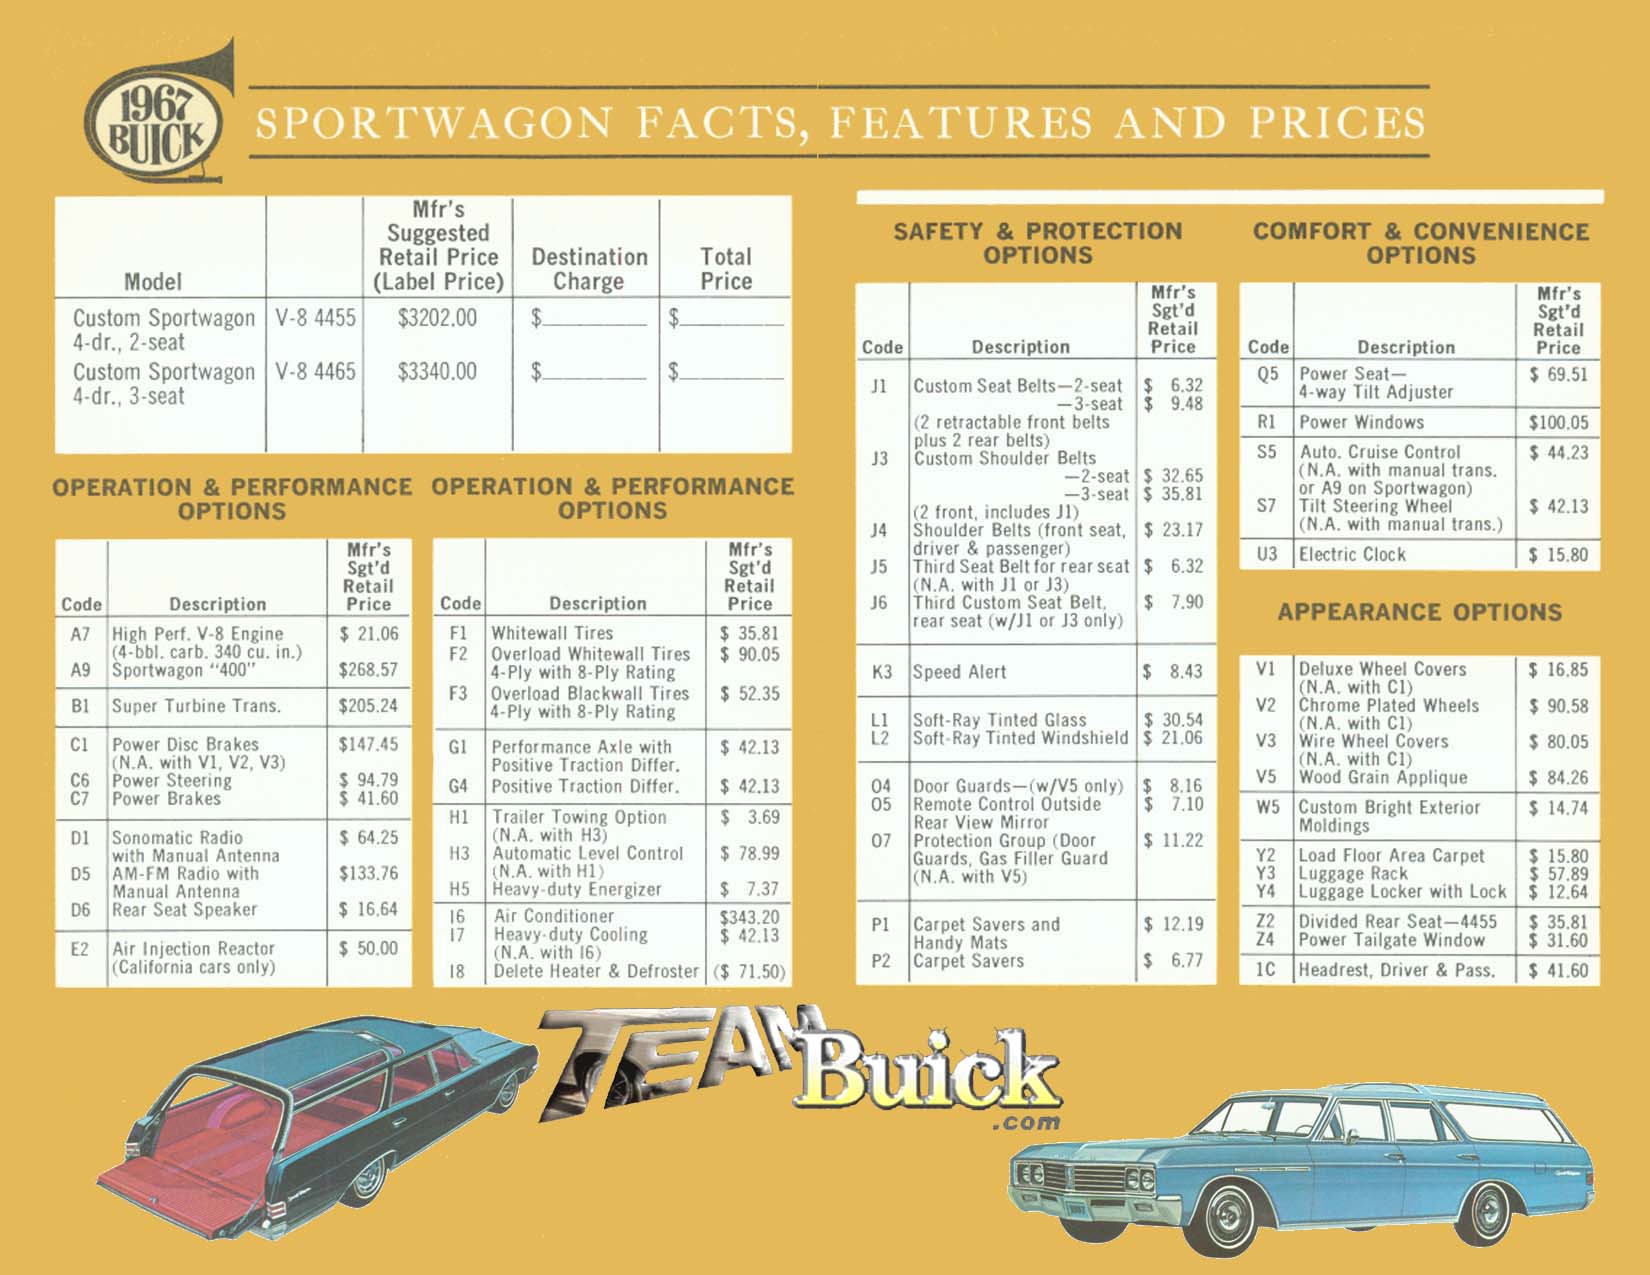 1967 Buick Sportwagon Options and Codes